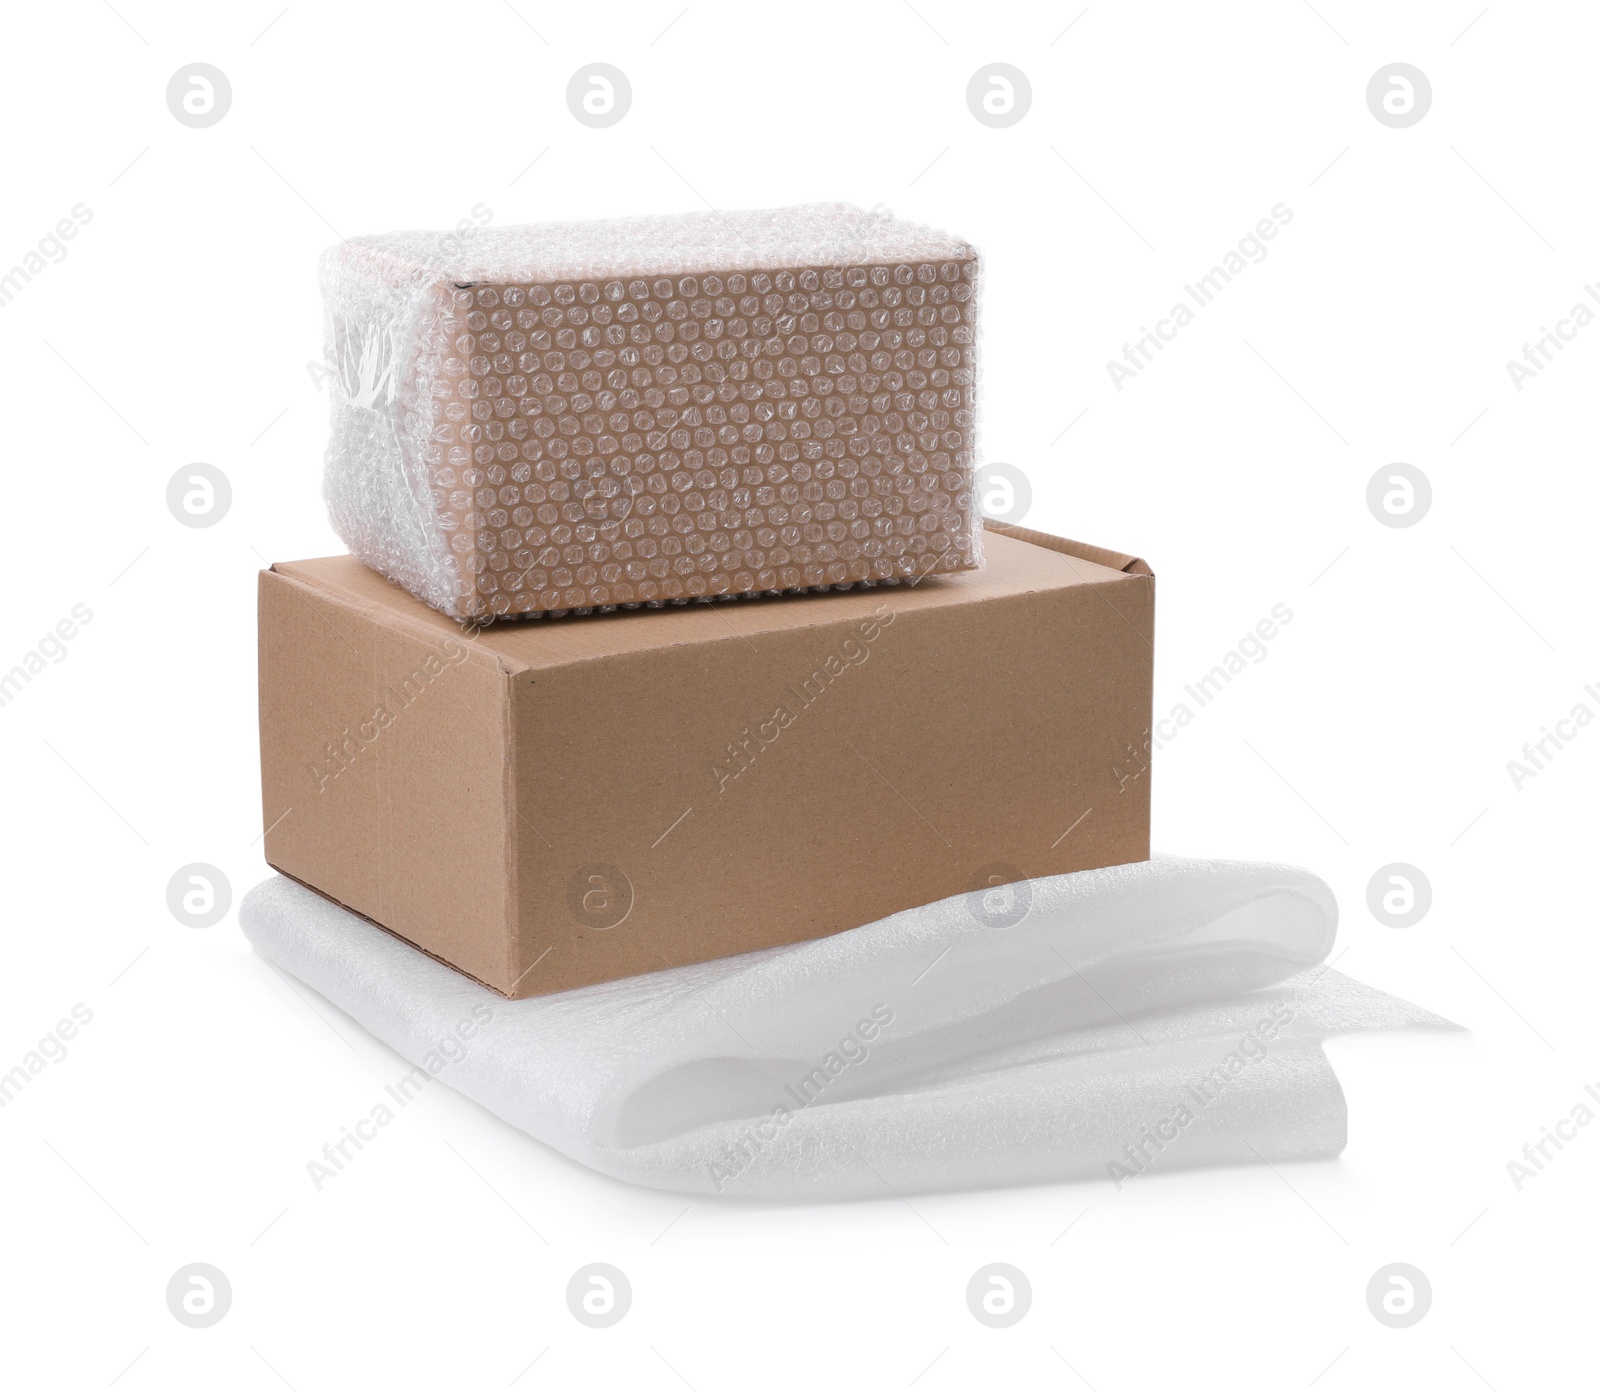 Photo of Cardboard boxes with bubble wrap and packaging foam on white background